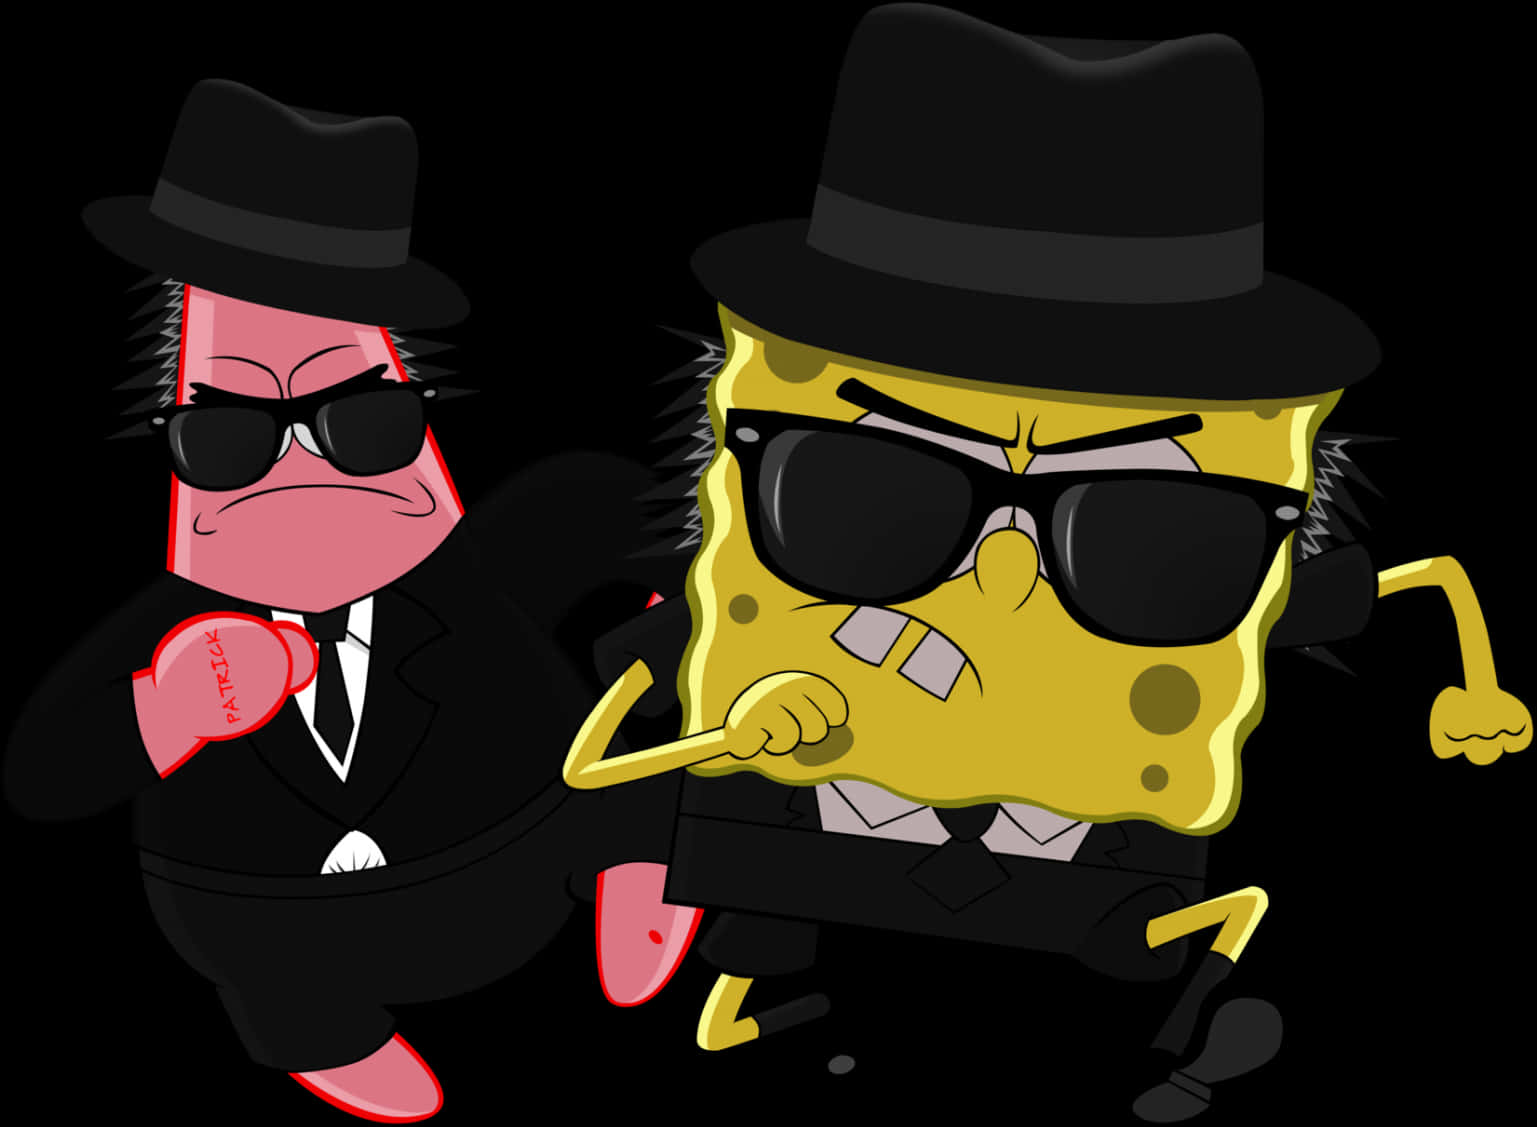 Cartoon Characters In Black Suits And Sunglasses